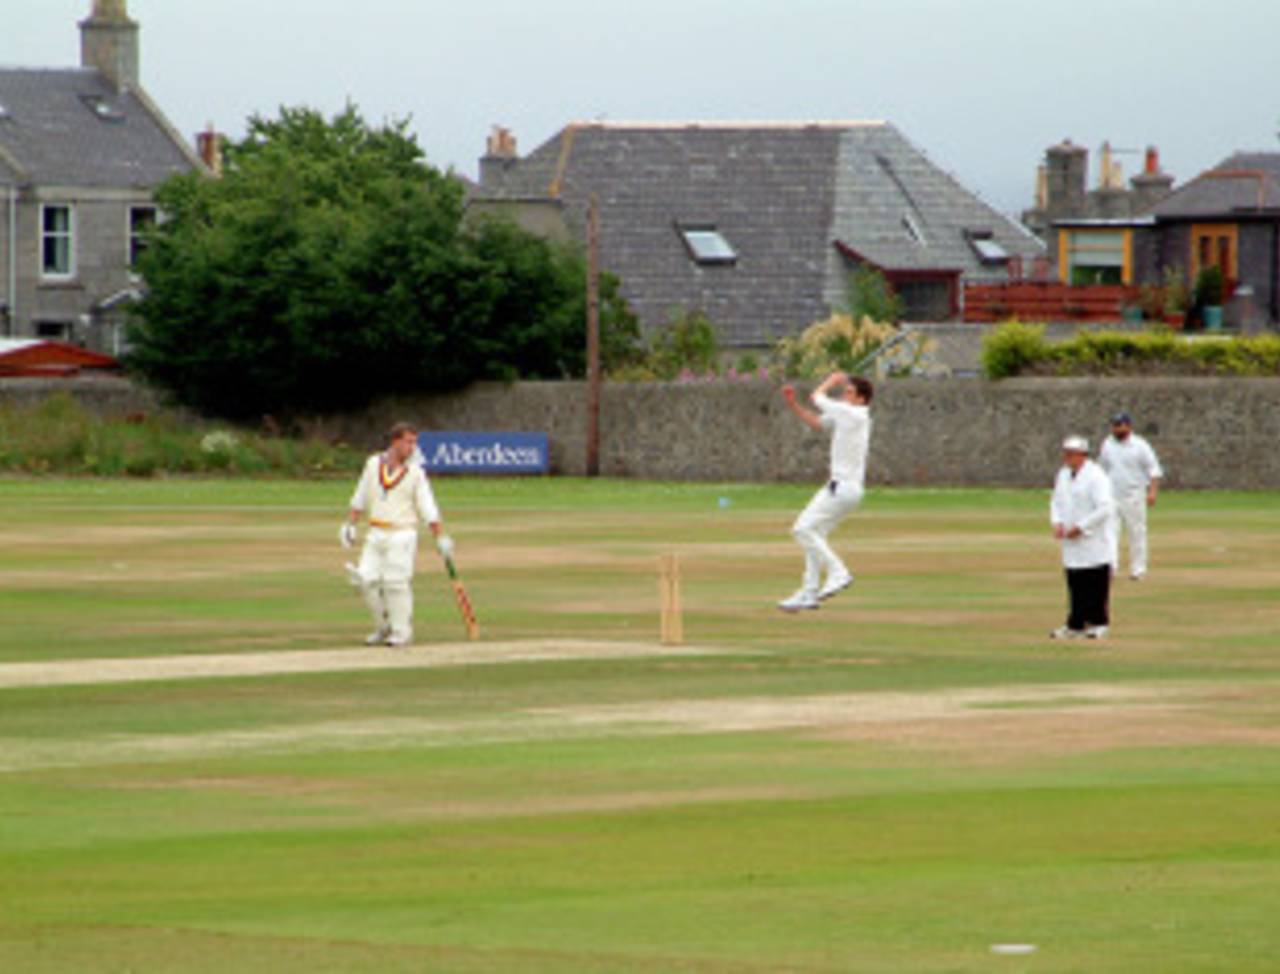 A game goes on at Aberdeenshire